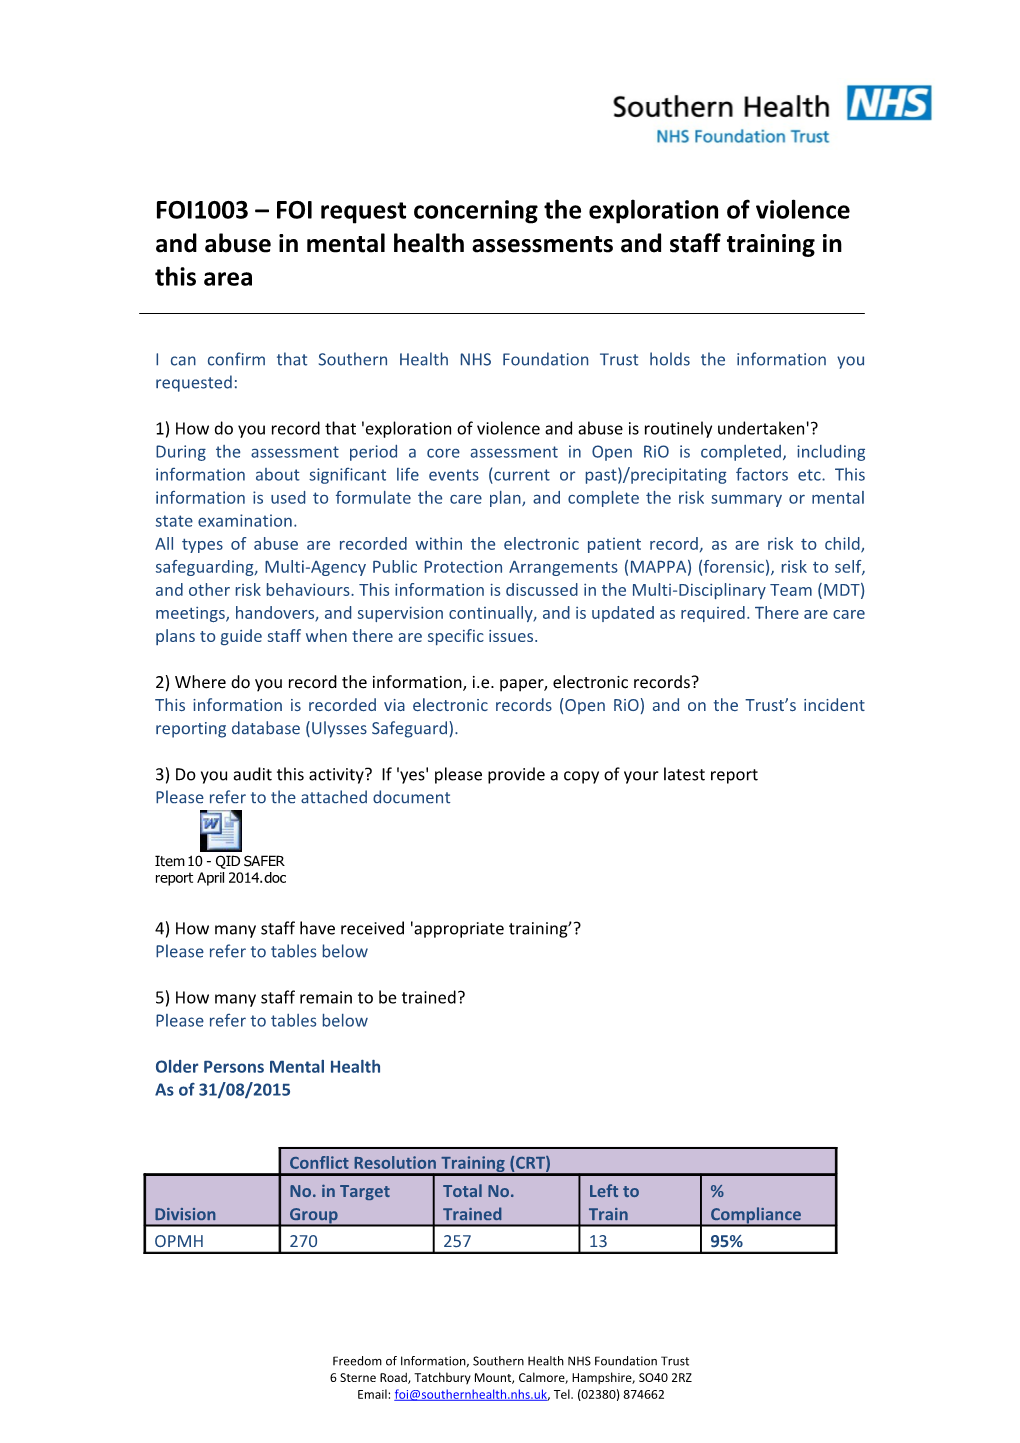 FOI1003 FOI Request Concerningthe Exploration of Violence and Abuse in Mental Health